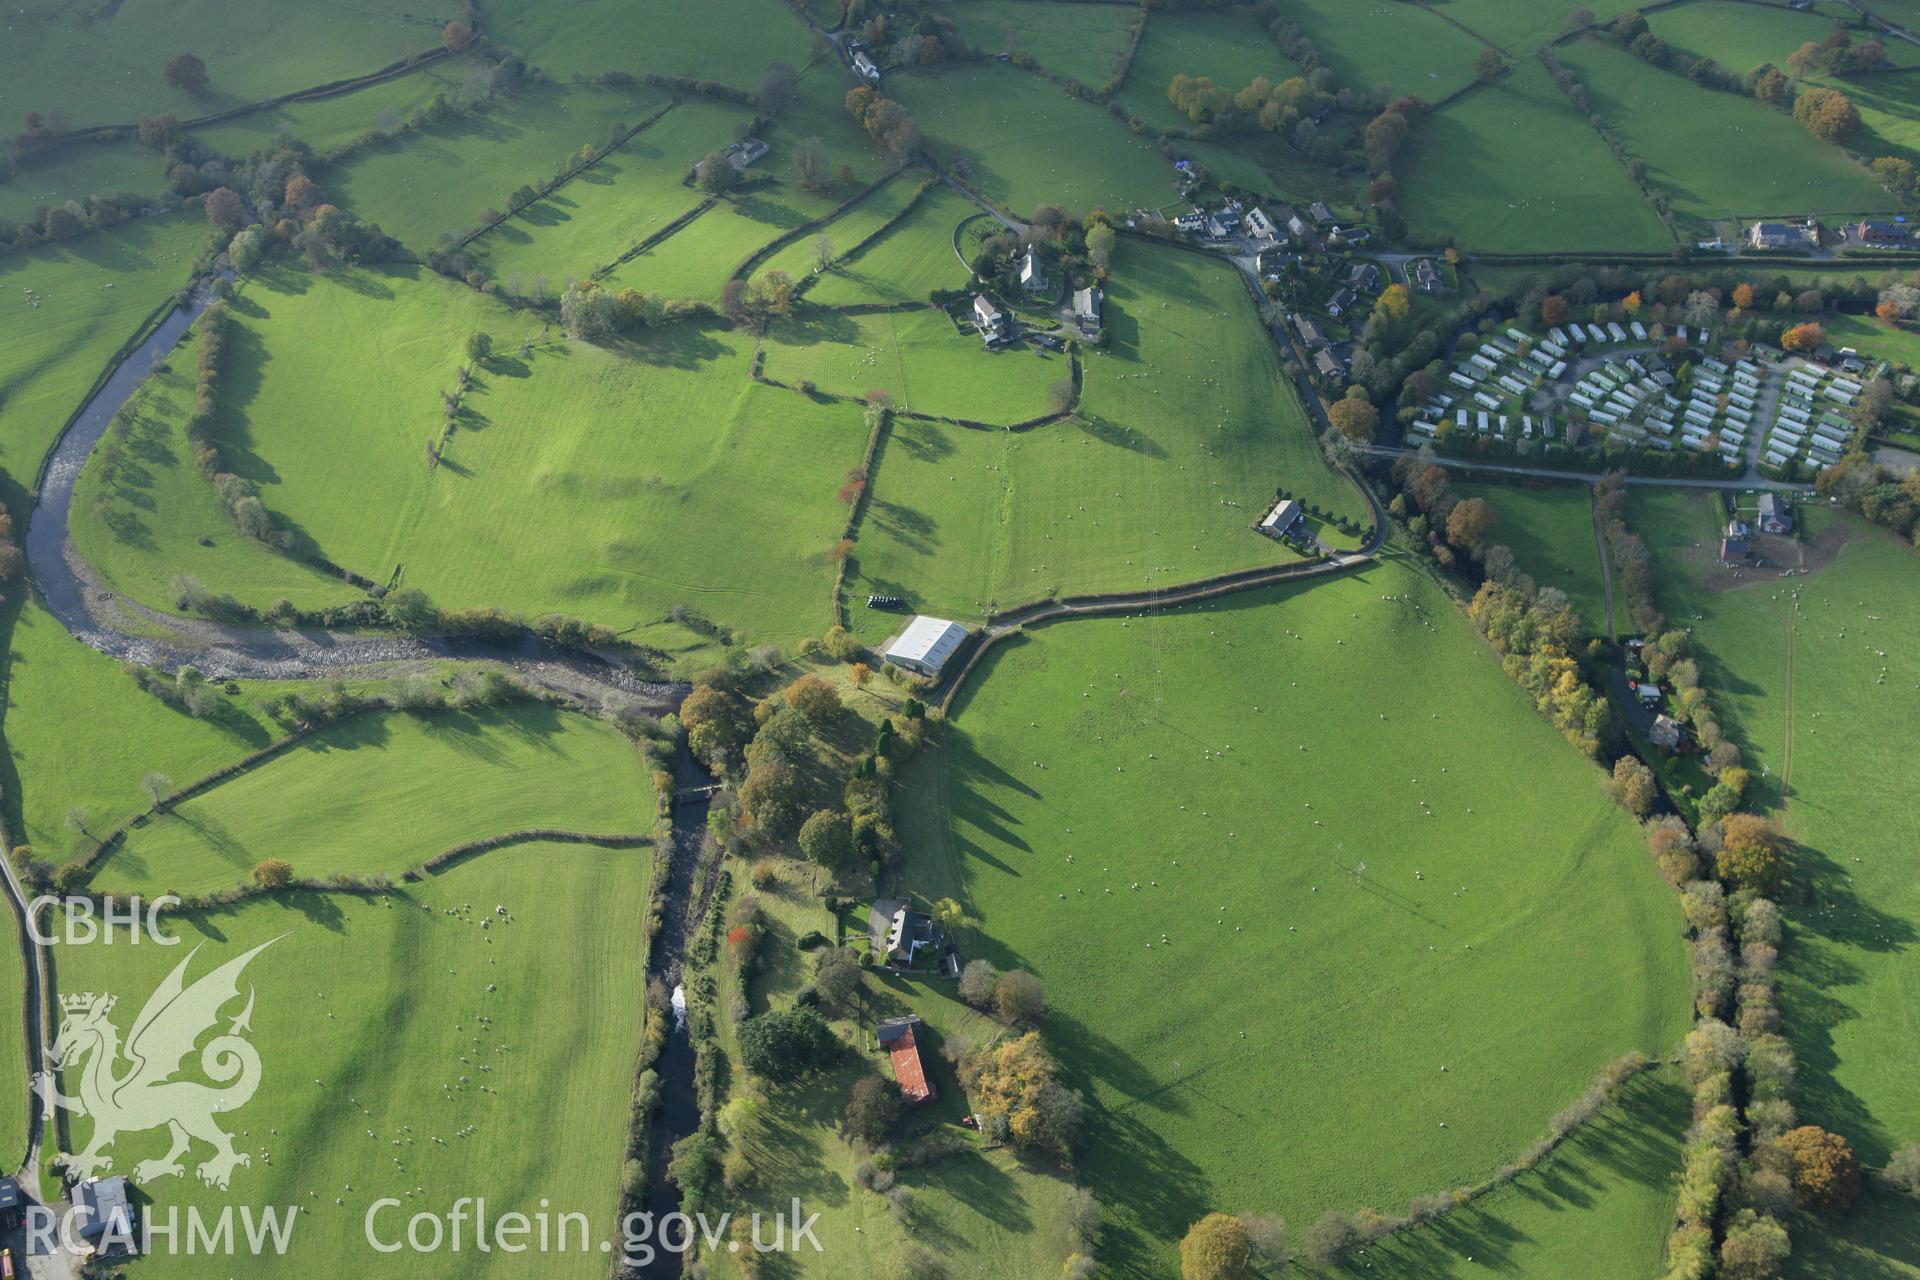 RCAHMW colour oblique photograph of St Cadfan's Church, and surrounding earthworks of former field boundaries. Taken by Toby Driver on 30/10/2007.